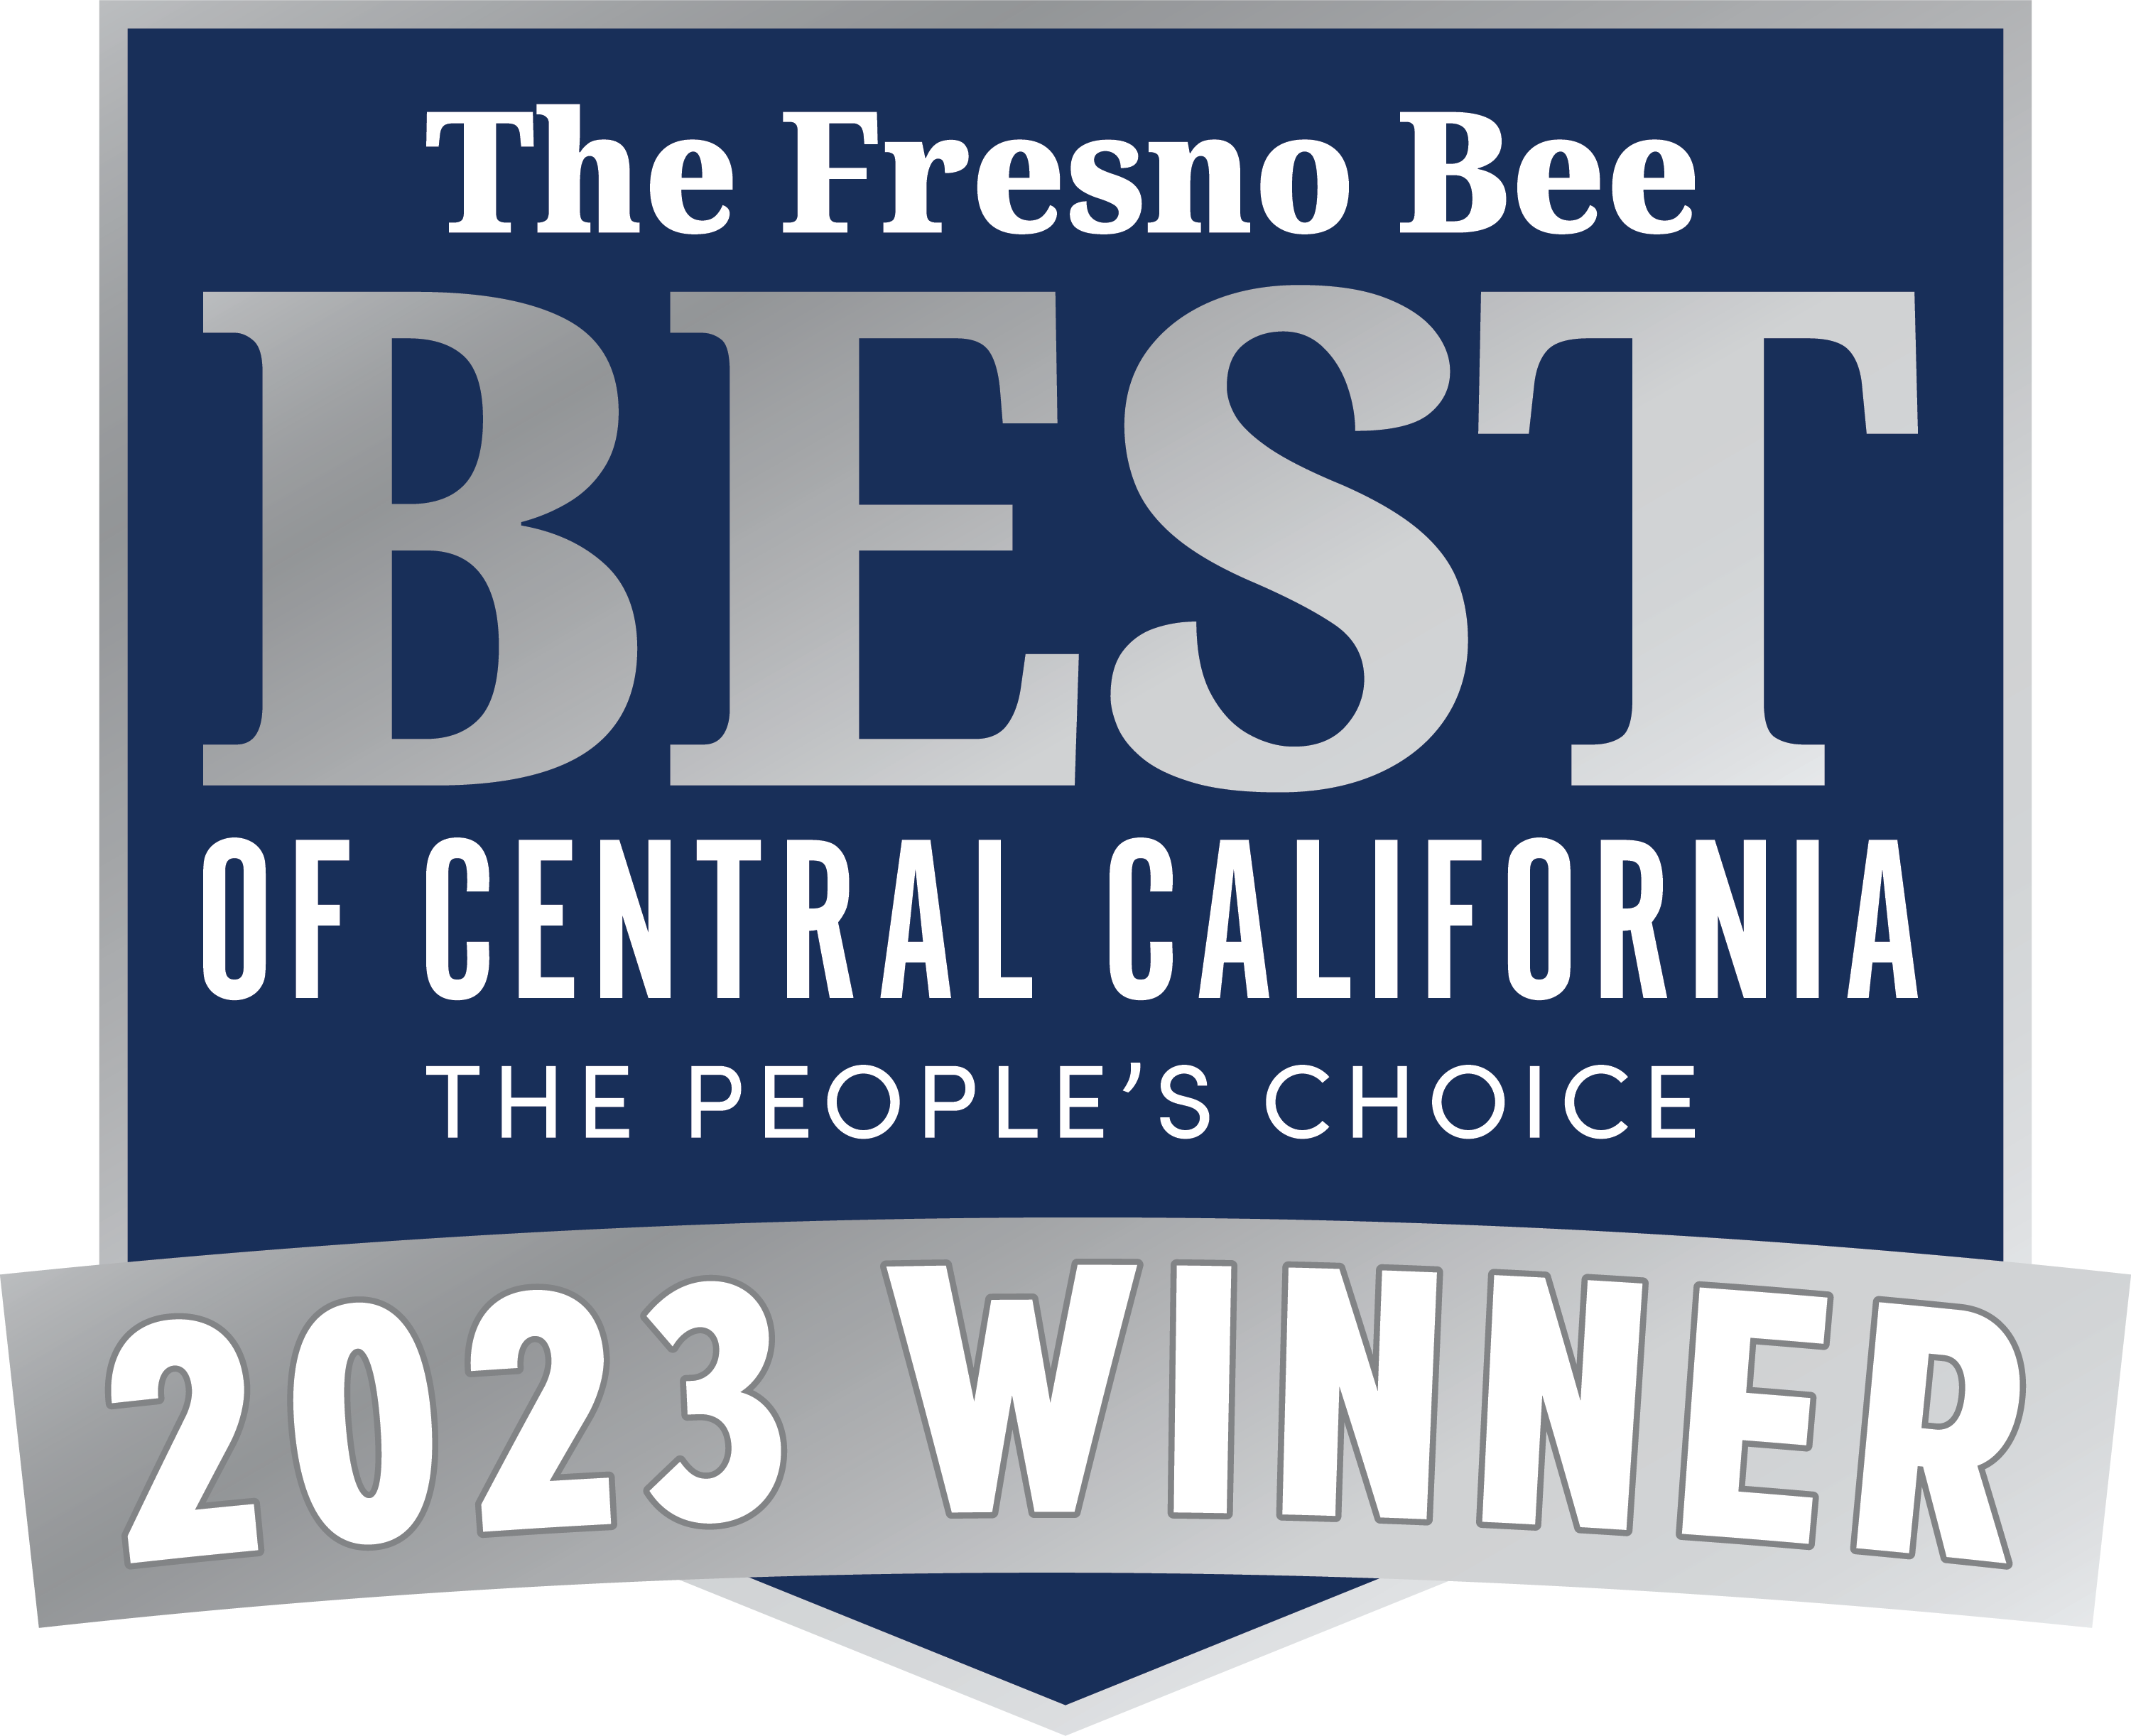 The Fresno Bee Best of Central California The People's Choice 2022 Winner